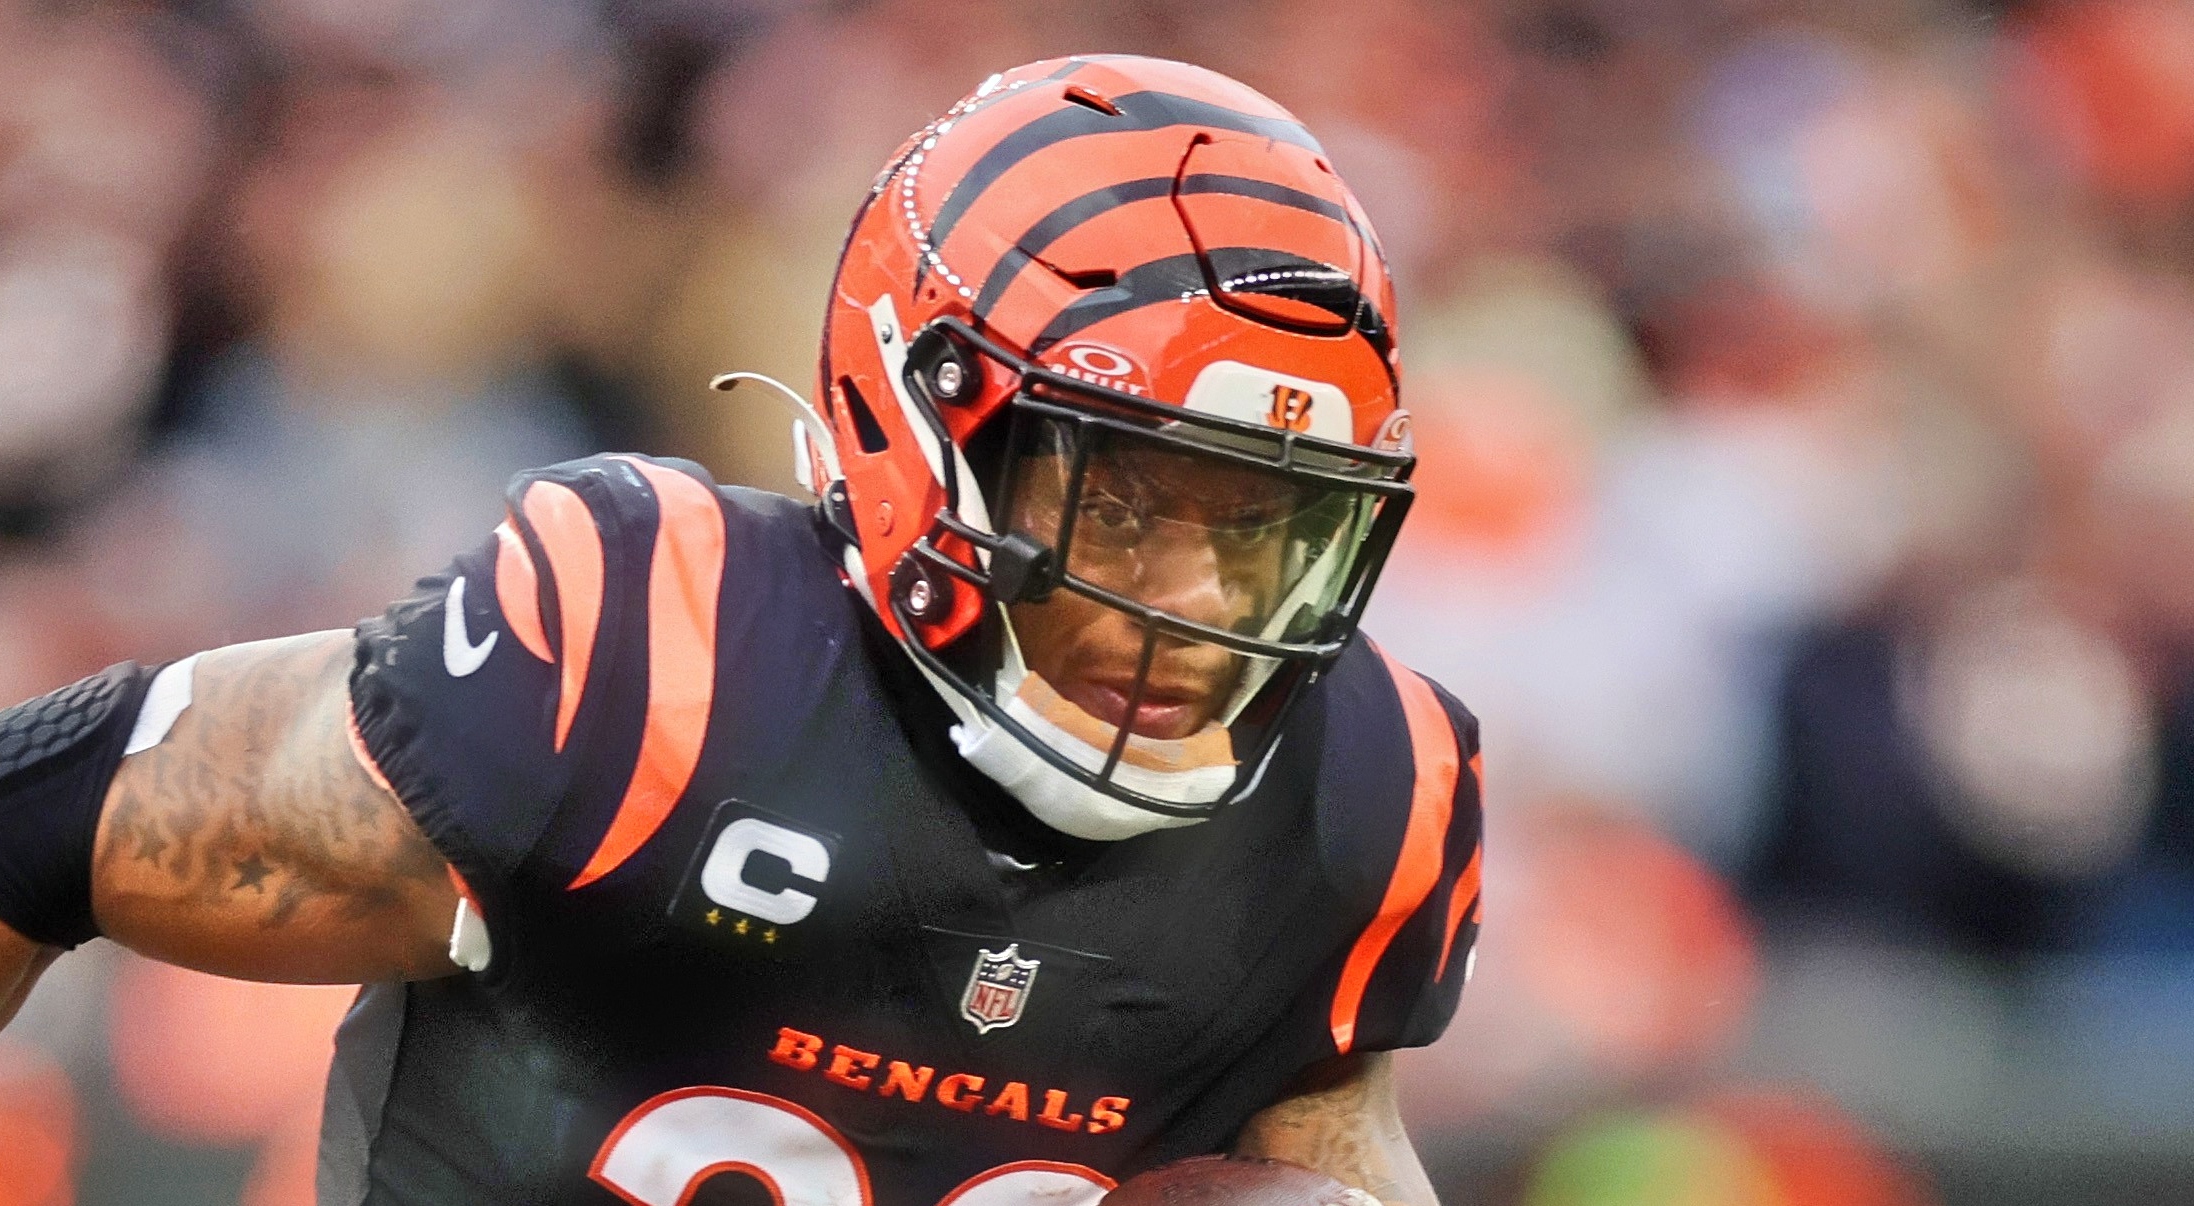 Bengals Joe Mixon Calls Out Fan Who Started Rumor About Him 8711